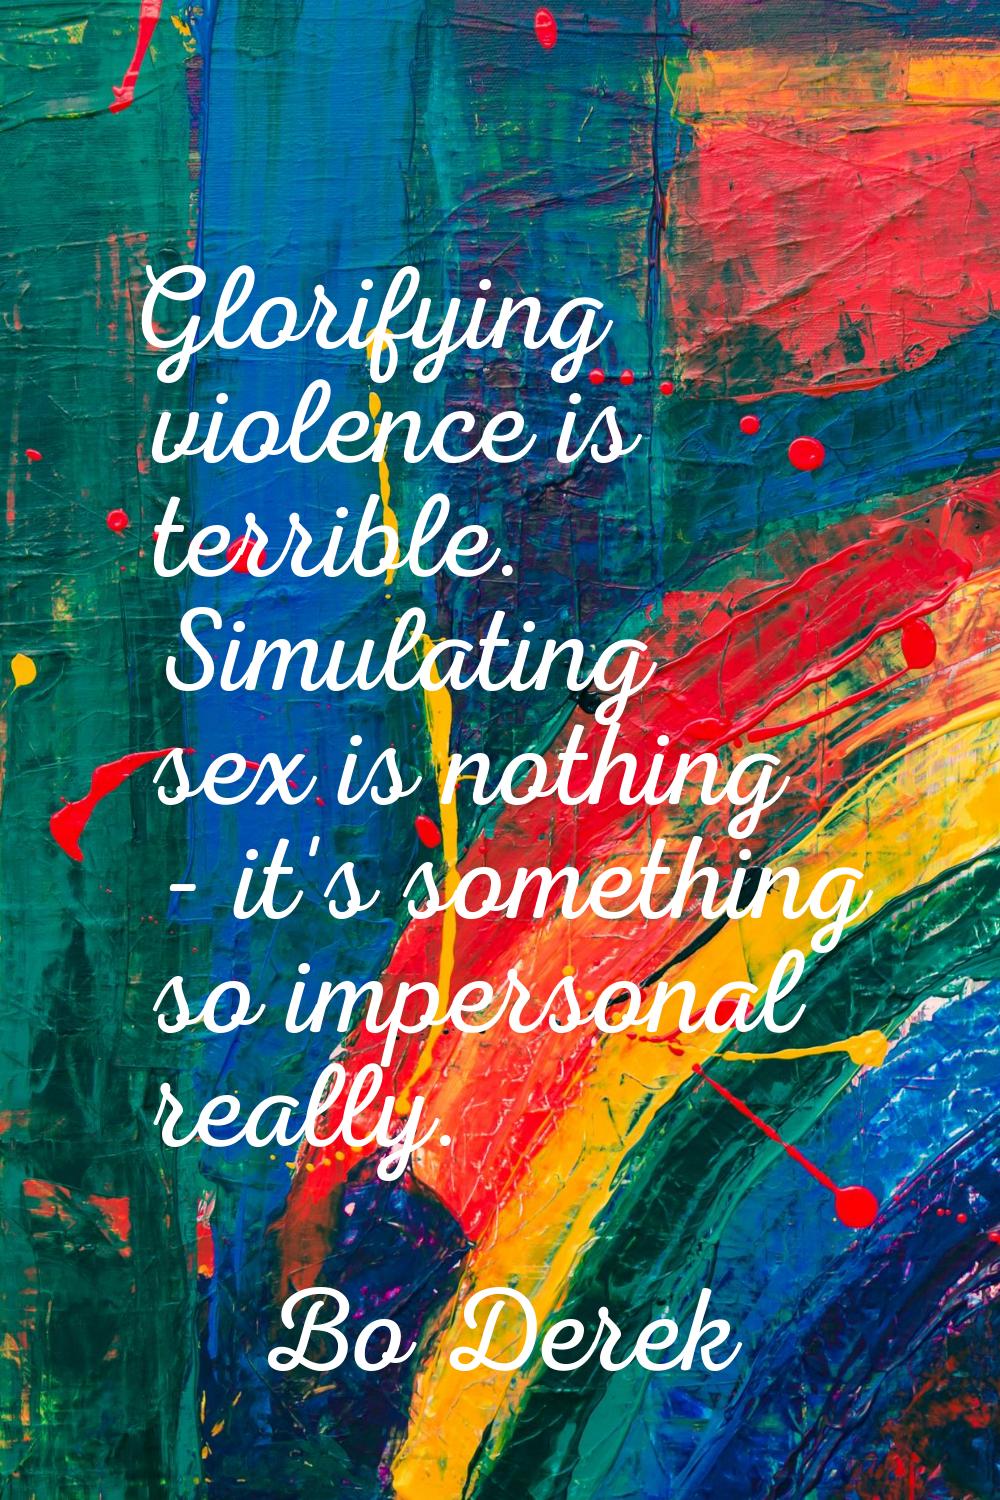 Glorifying violence is terrible. Simulating sex is nothing - it's something so impersonal really.